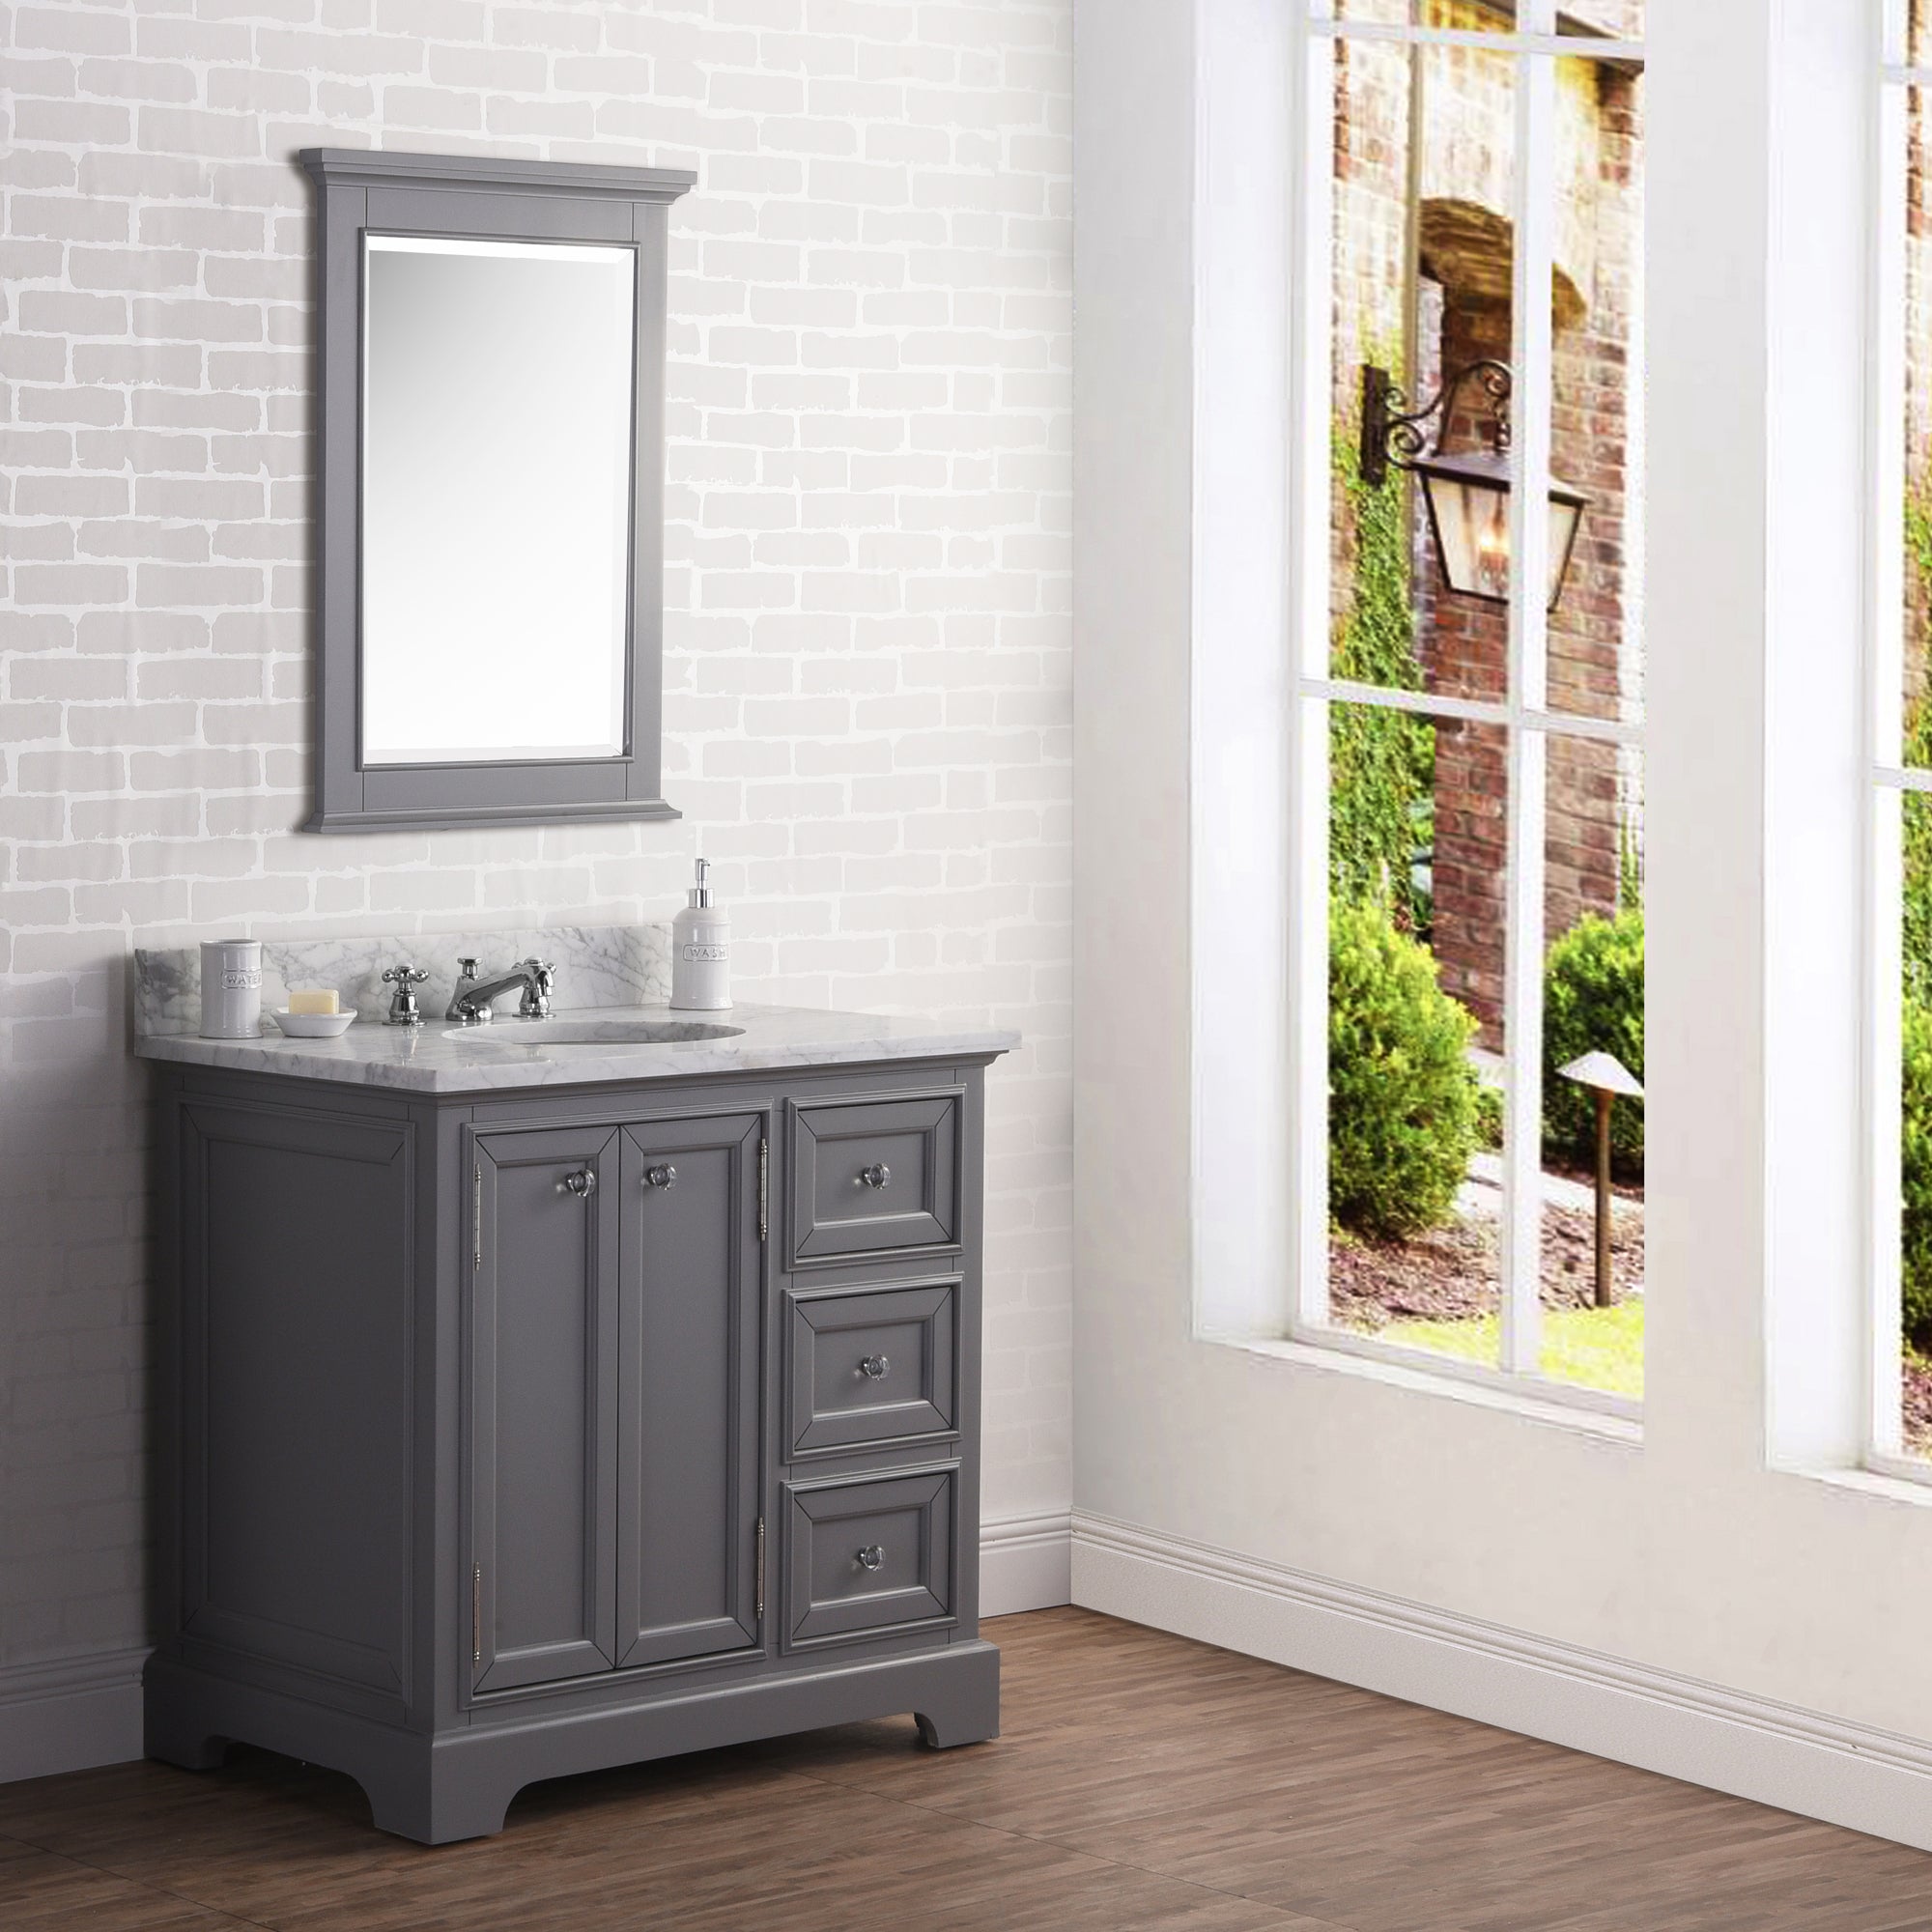 Water Creation | 36 Inch Wide Cashmere Grey Single Sink Carrara Marble Bathroom Vanity With Matching Mirror From The Derby Collection | DE36CW01CG-B24000000